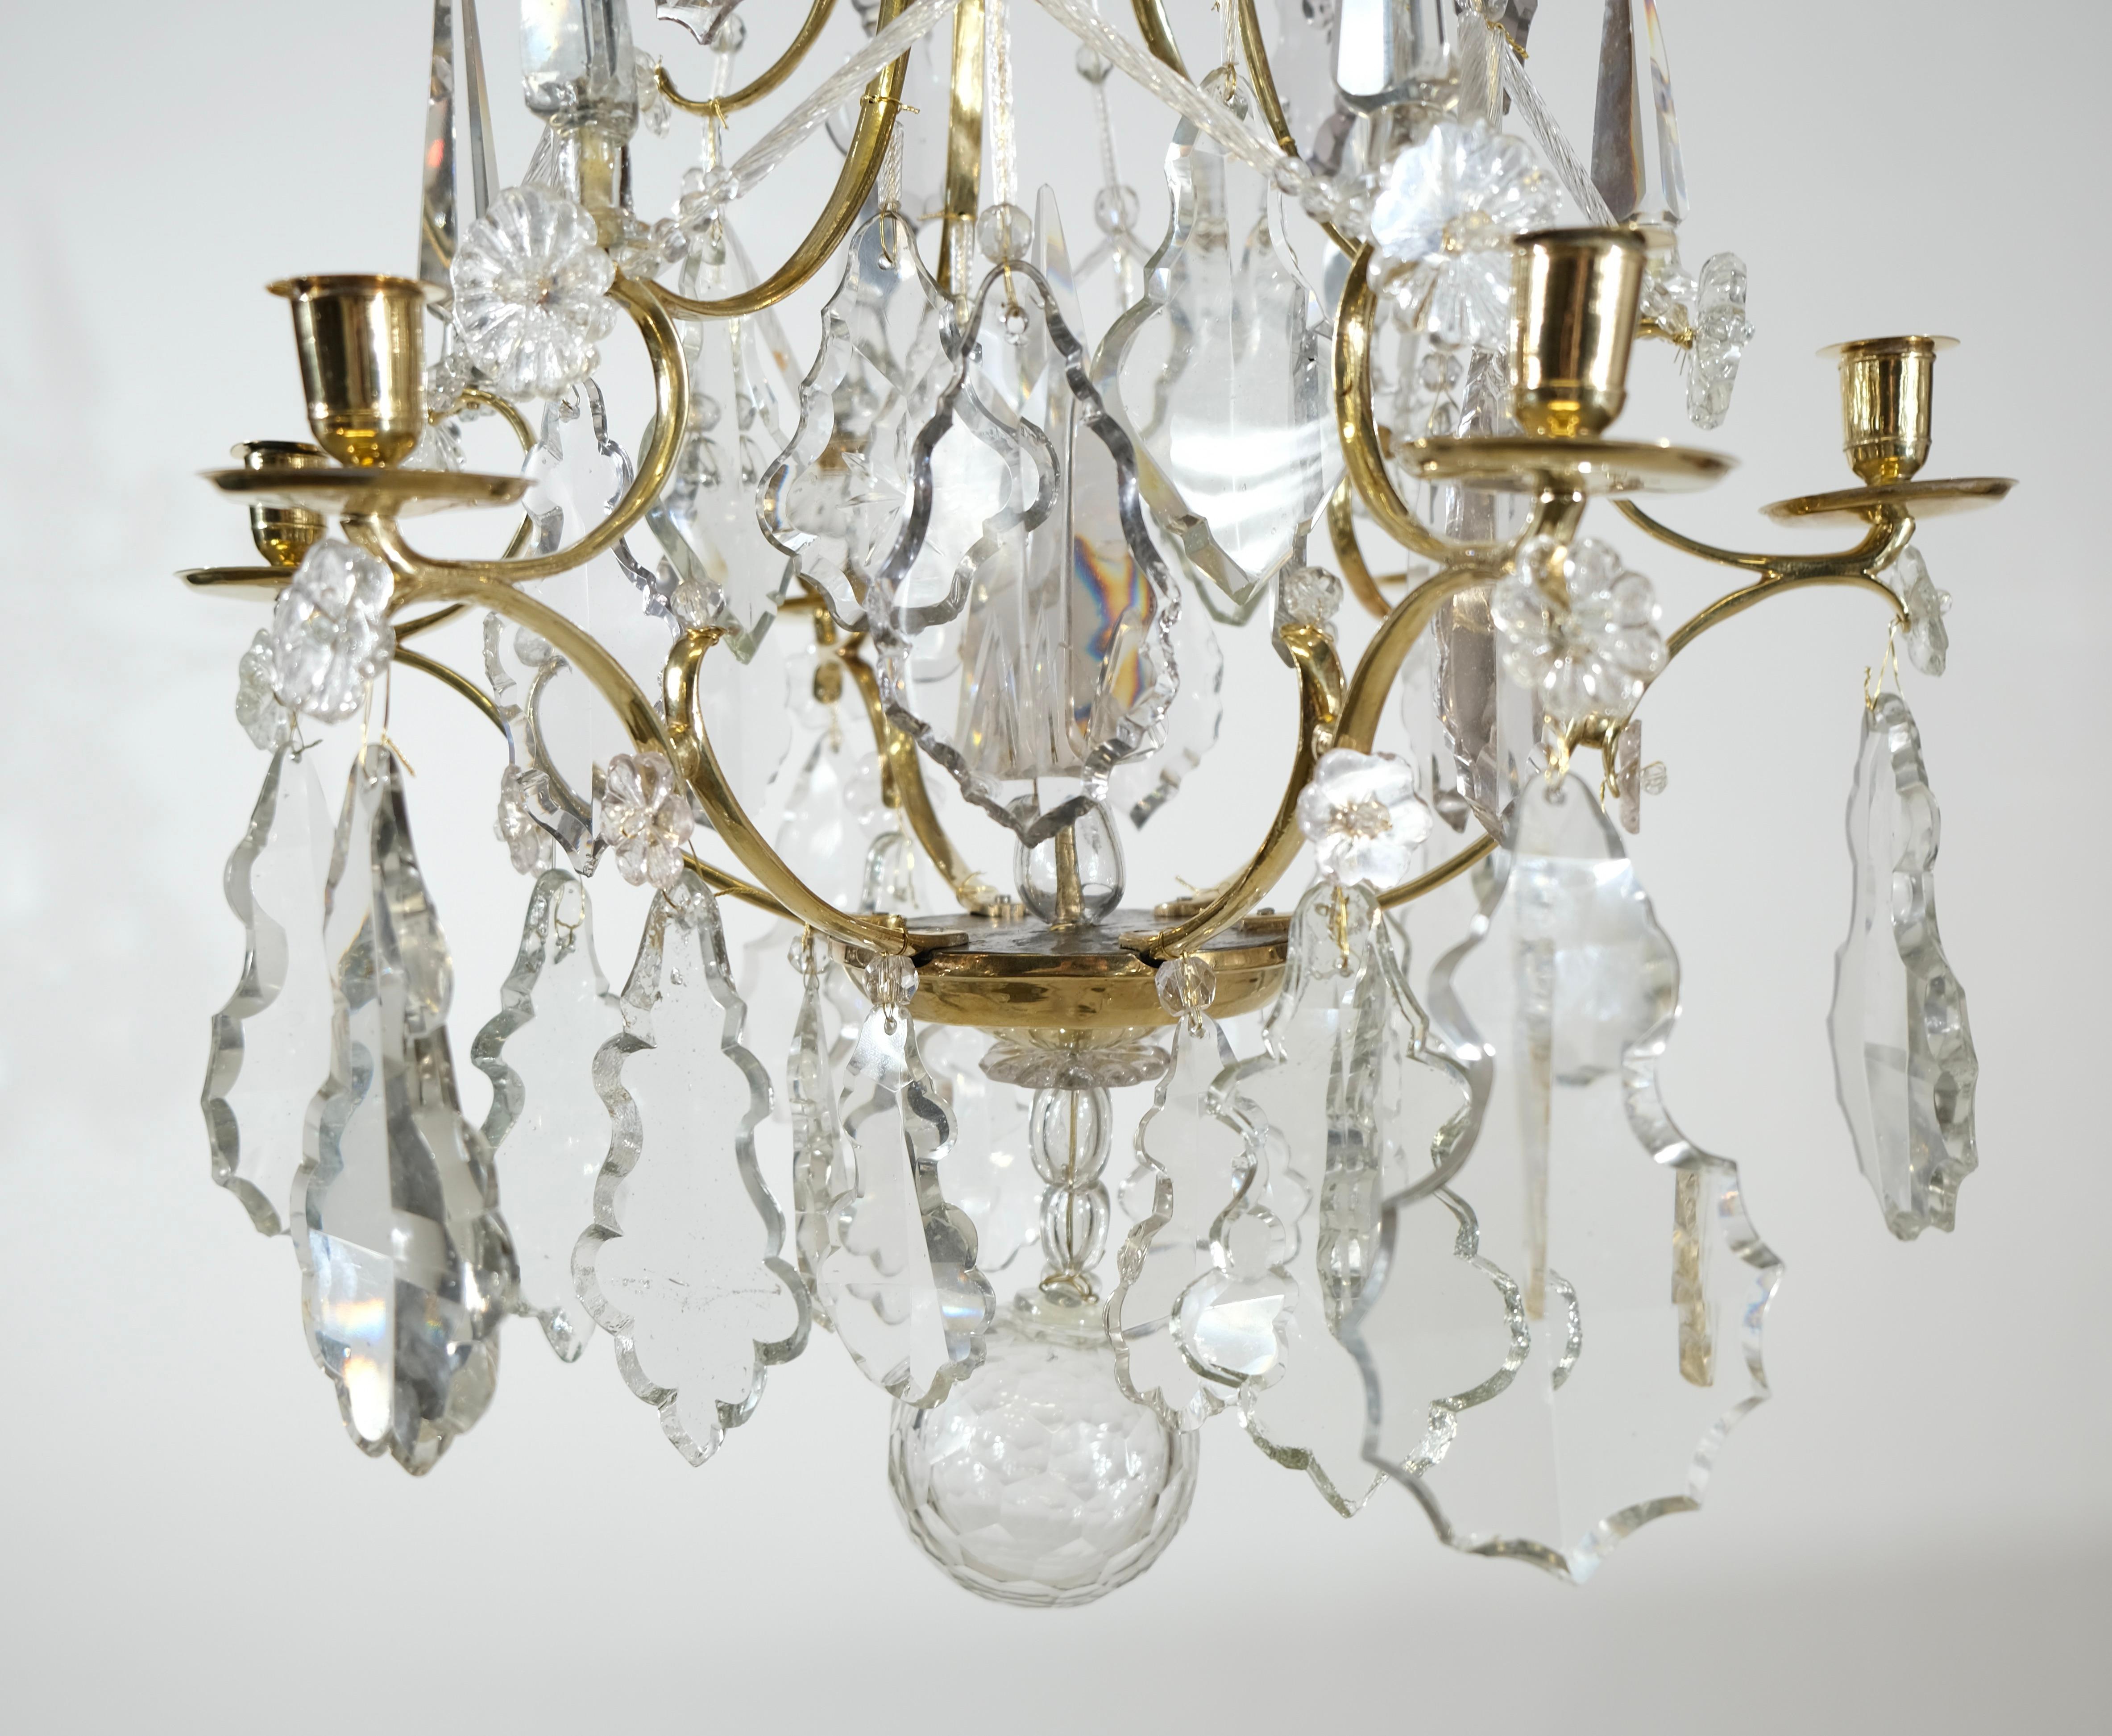 A fantastic small Swedish Rococo chandelier with wonderful proportions made in the second half of the 18th c. The pear shaped metal frame is made of cast brass. In it hangs cast, and cut crystals that are shaped as leaves. There is also a 